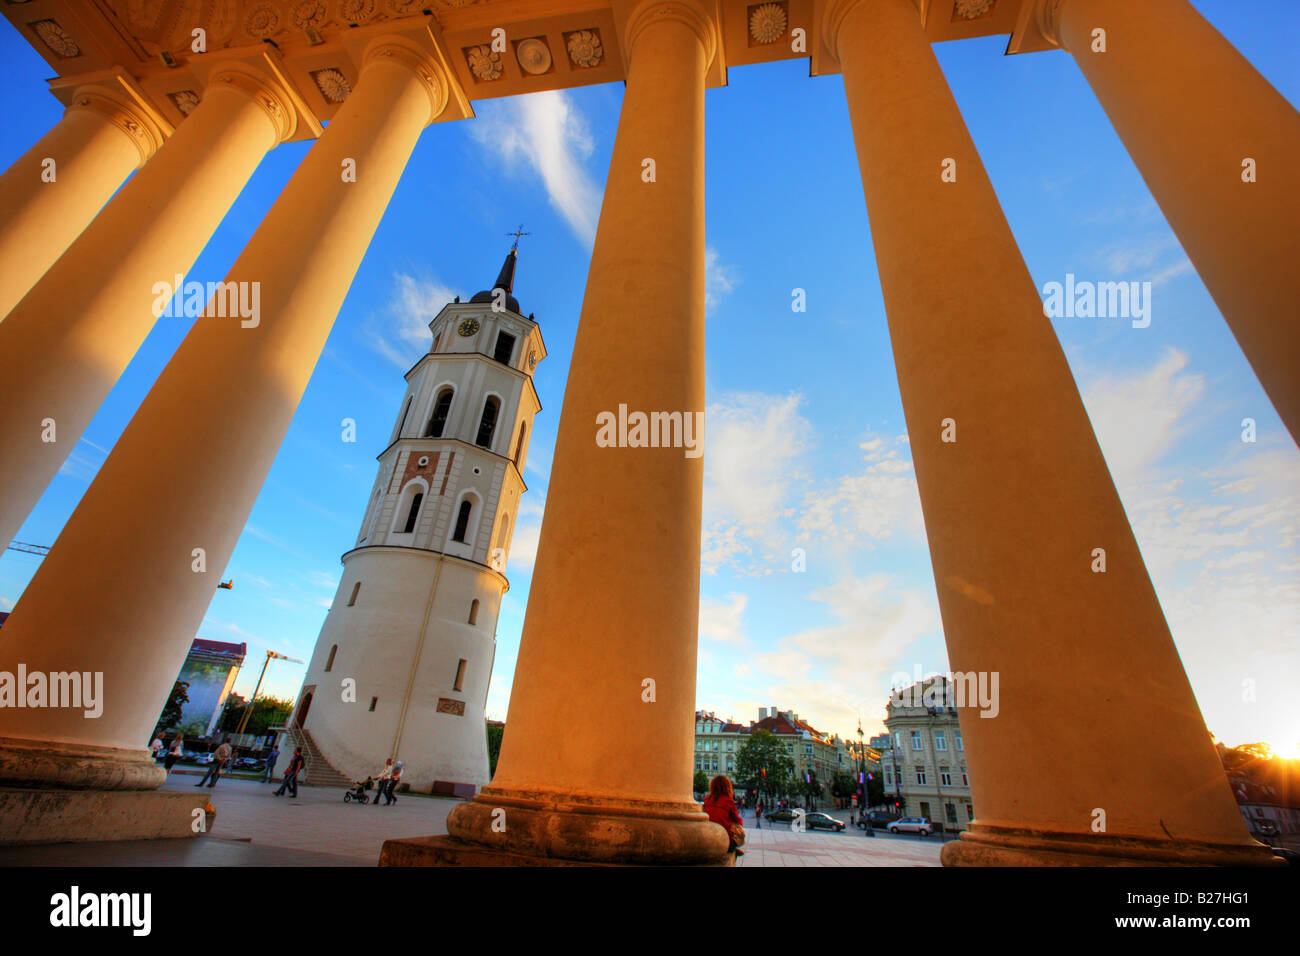 LTU Lithuania Capital Vilnius The St Stanislaus Cathedral and the seperate church bell tower at Cathedral square Stock Photo